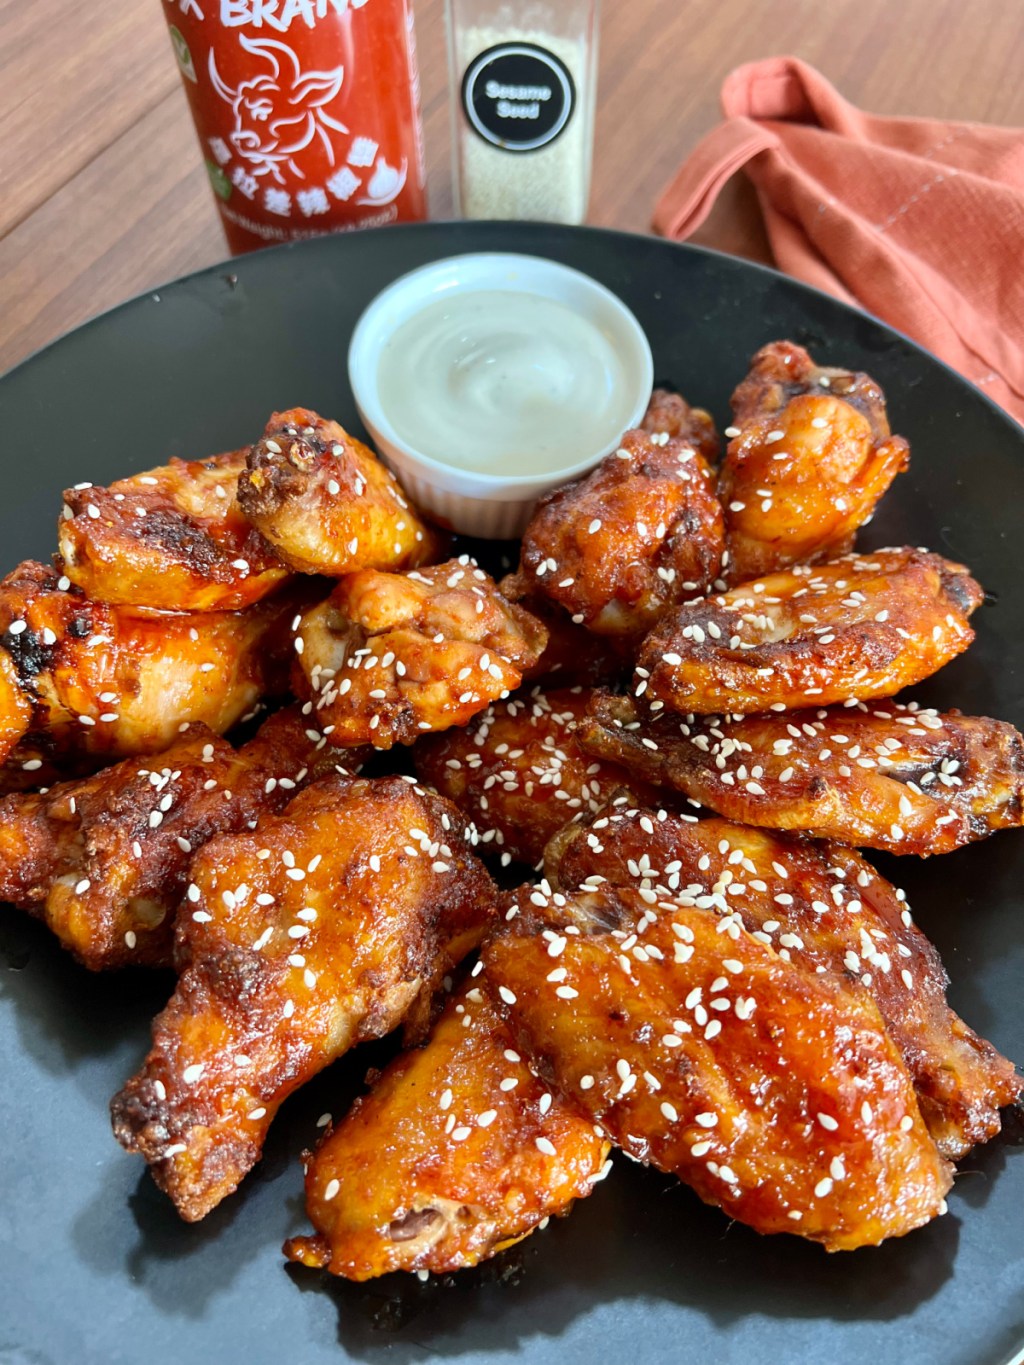 large plate of sriratcha honey baked wings with sesame seeds on a black plate